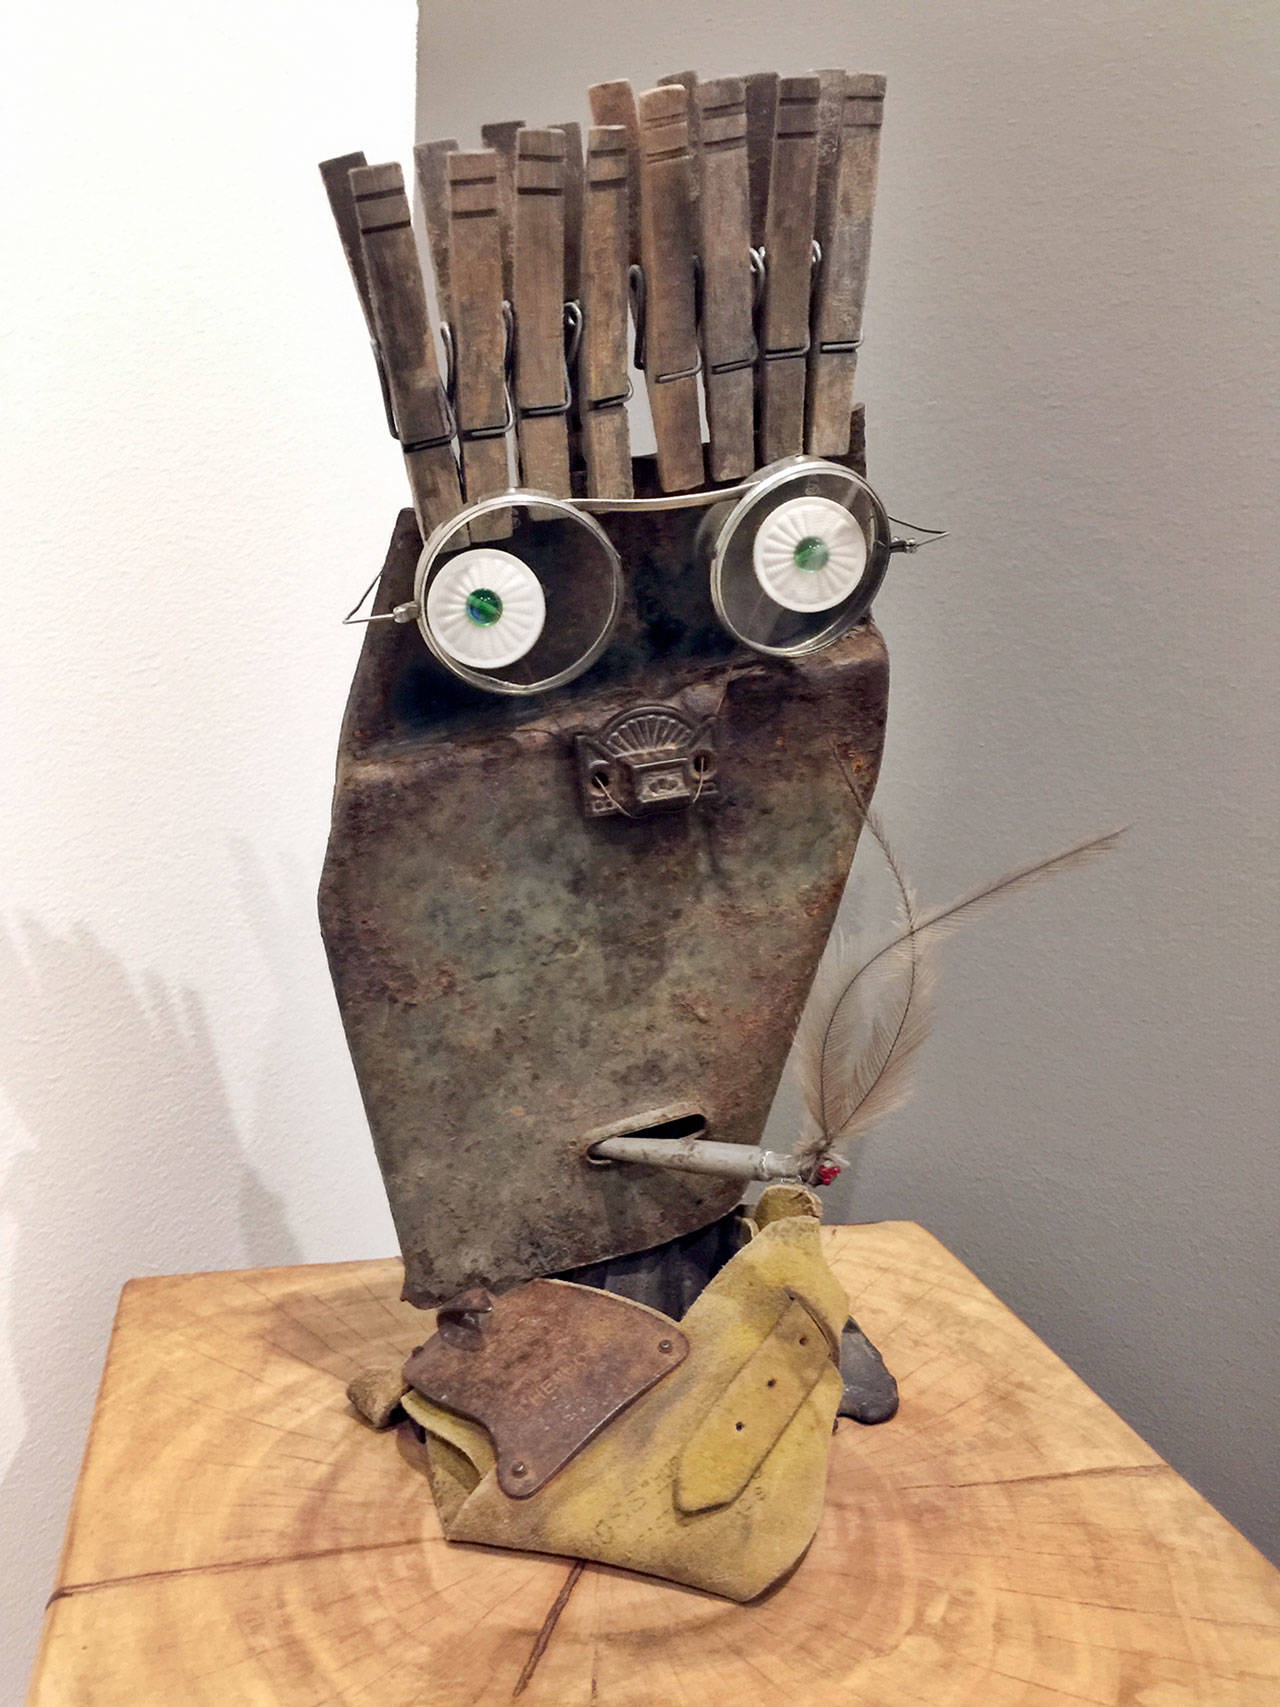 “Buzzed” by Sue Eller is in the Northwind Showcase.